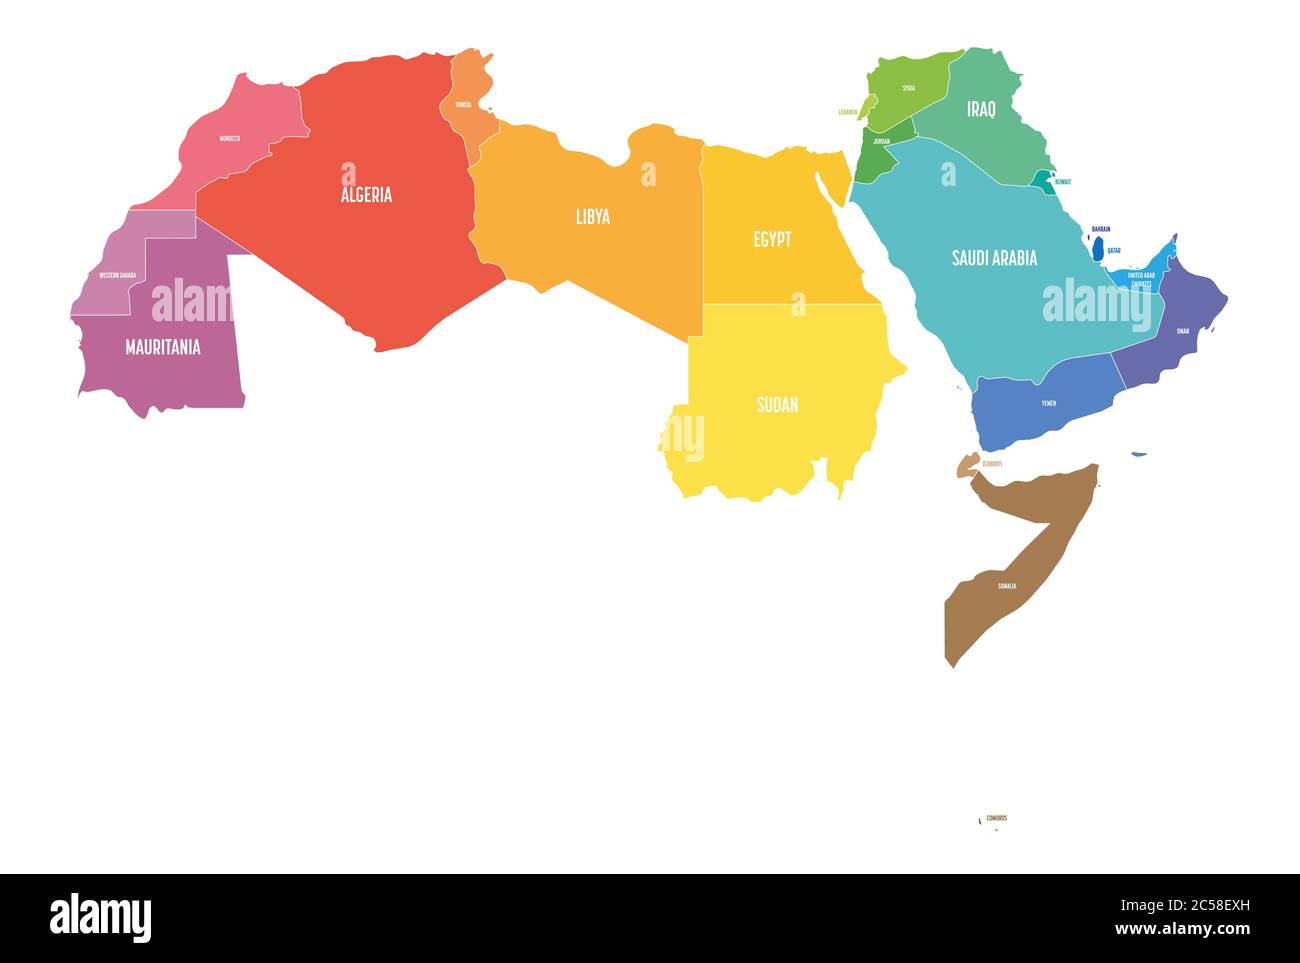 Arab World states political map with colorfully higlighted 22 arabic-speaking countries of the Arab League. Northern Africa and Middle East region. Vector illustration. Stock Vector